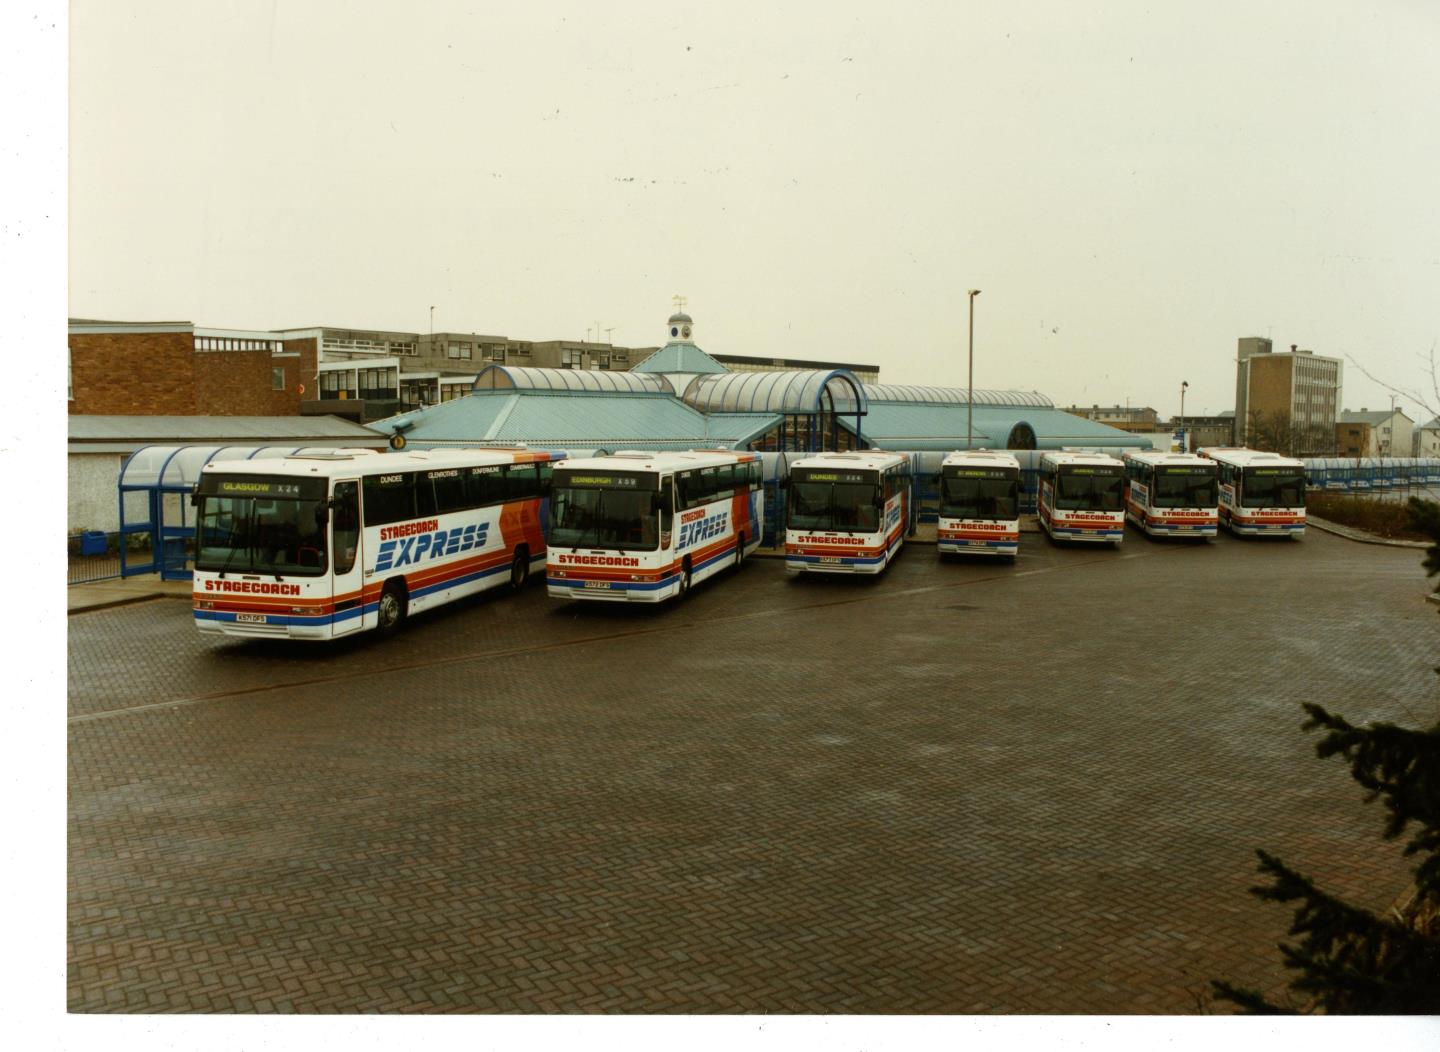 Stagecoach buses at Glenrothes Bus Station in 1993.